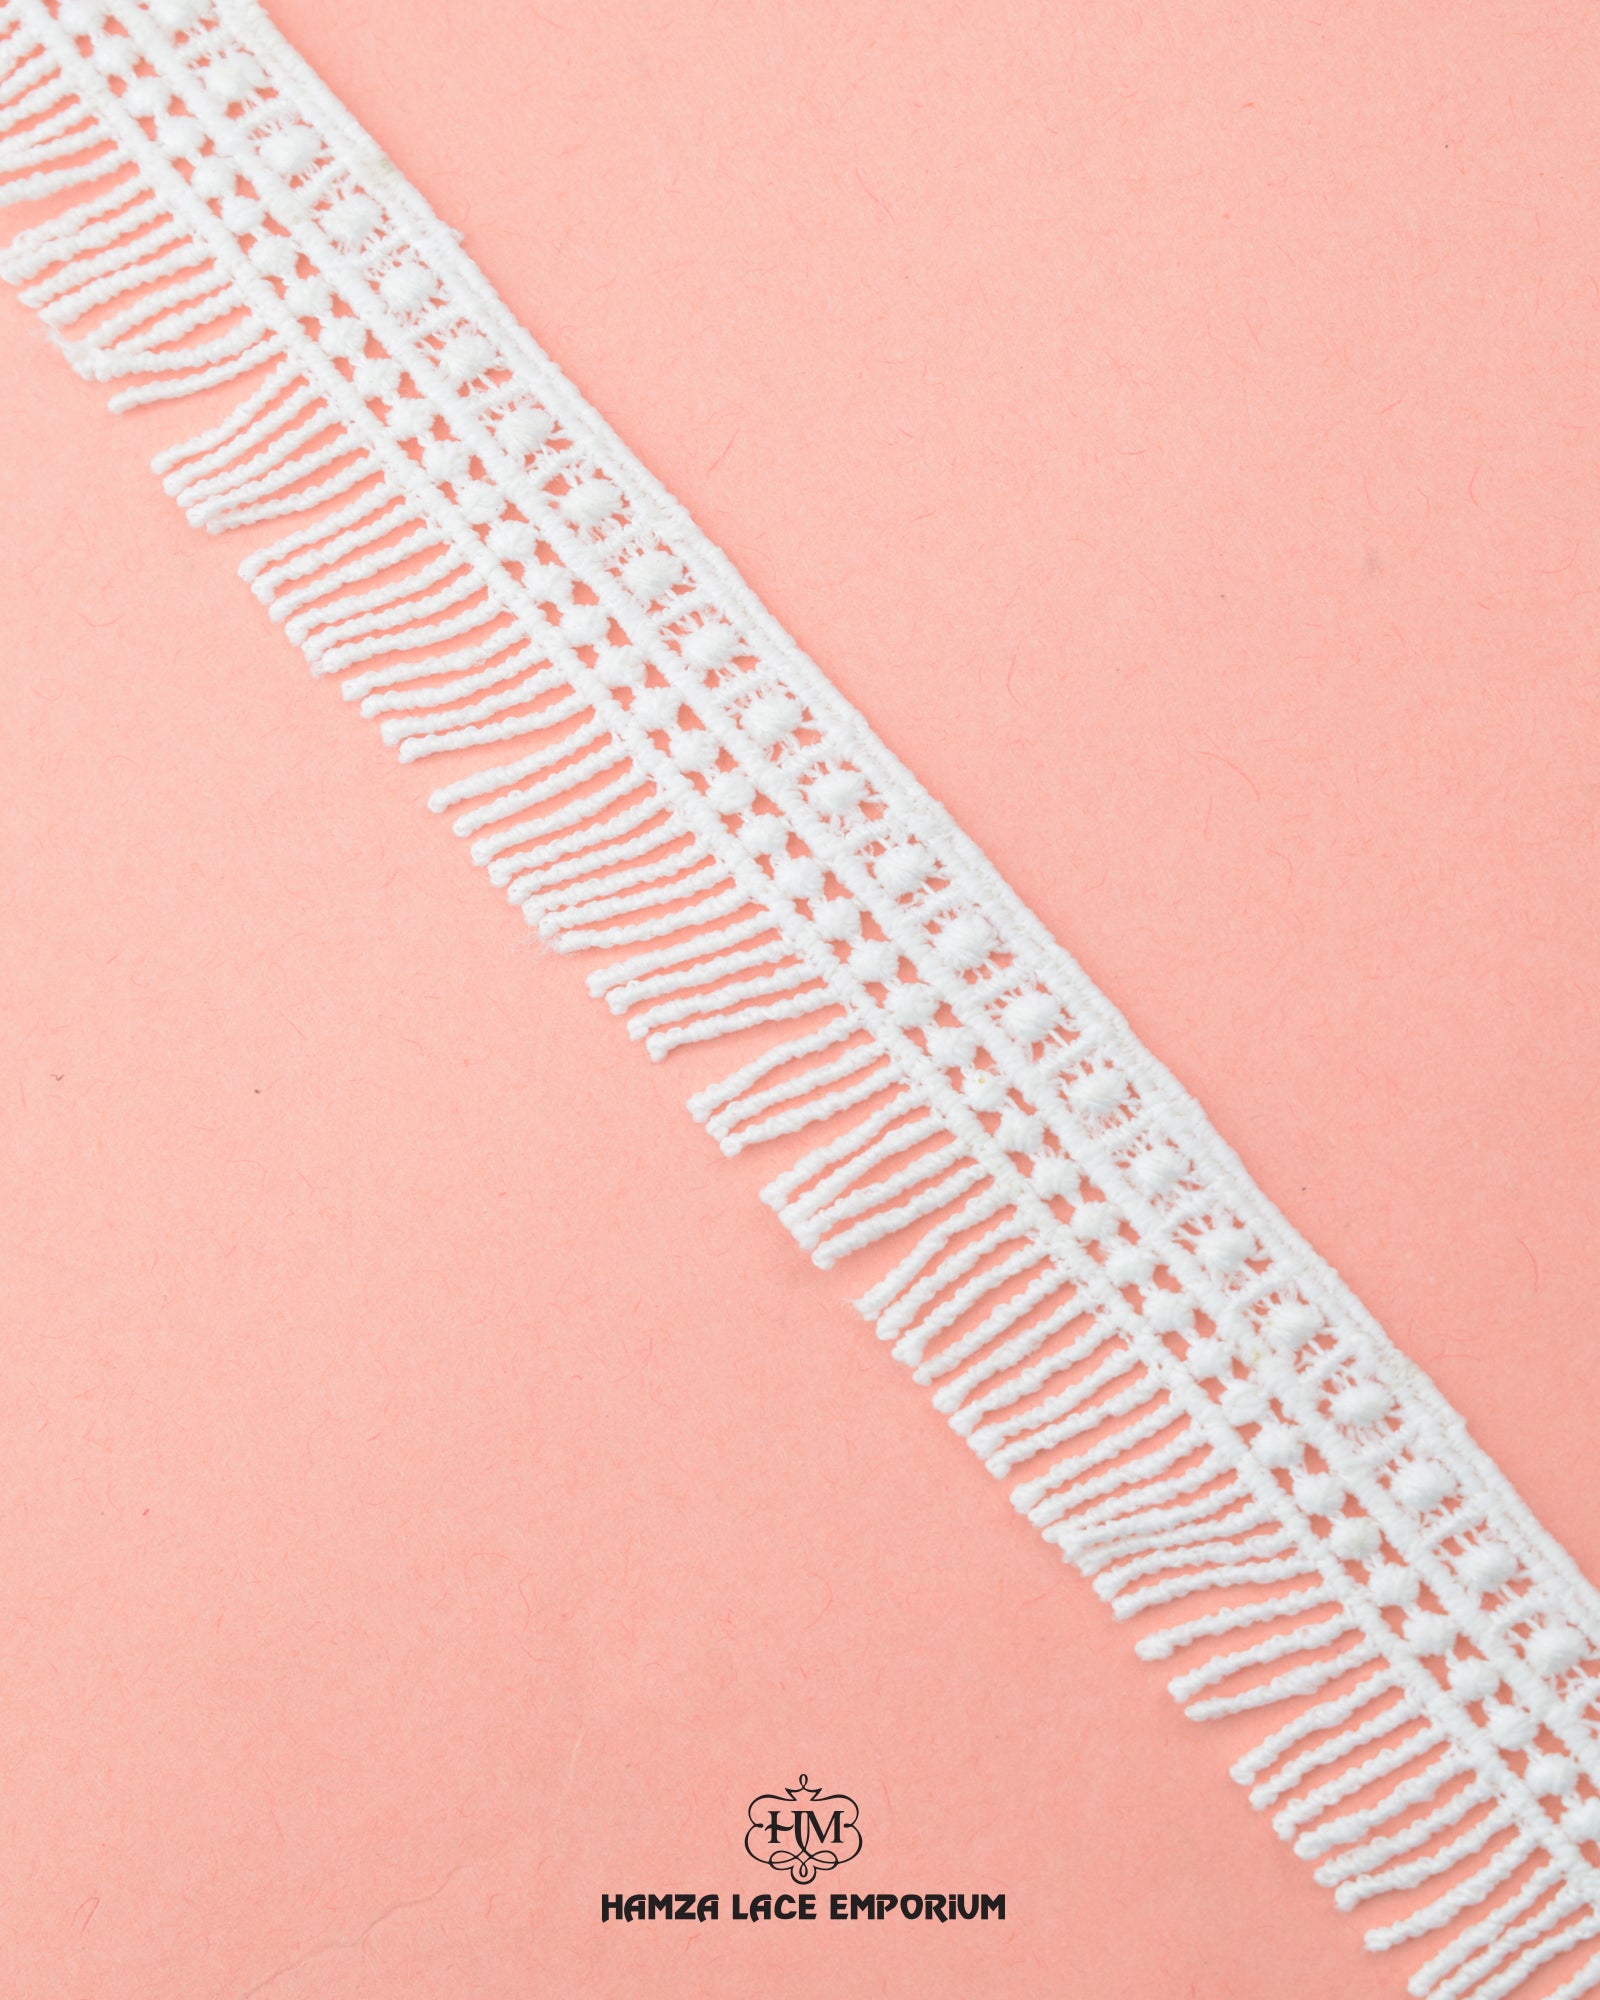 The white 'Edging Jhaalar Lace 22513' with the 'Hamza Lace Emporium' sign and logo